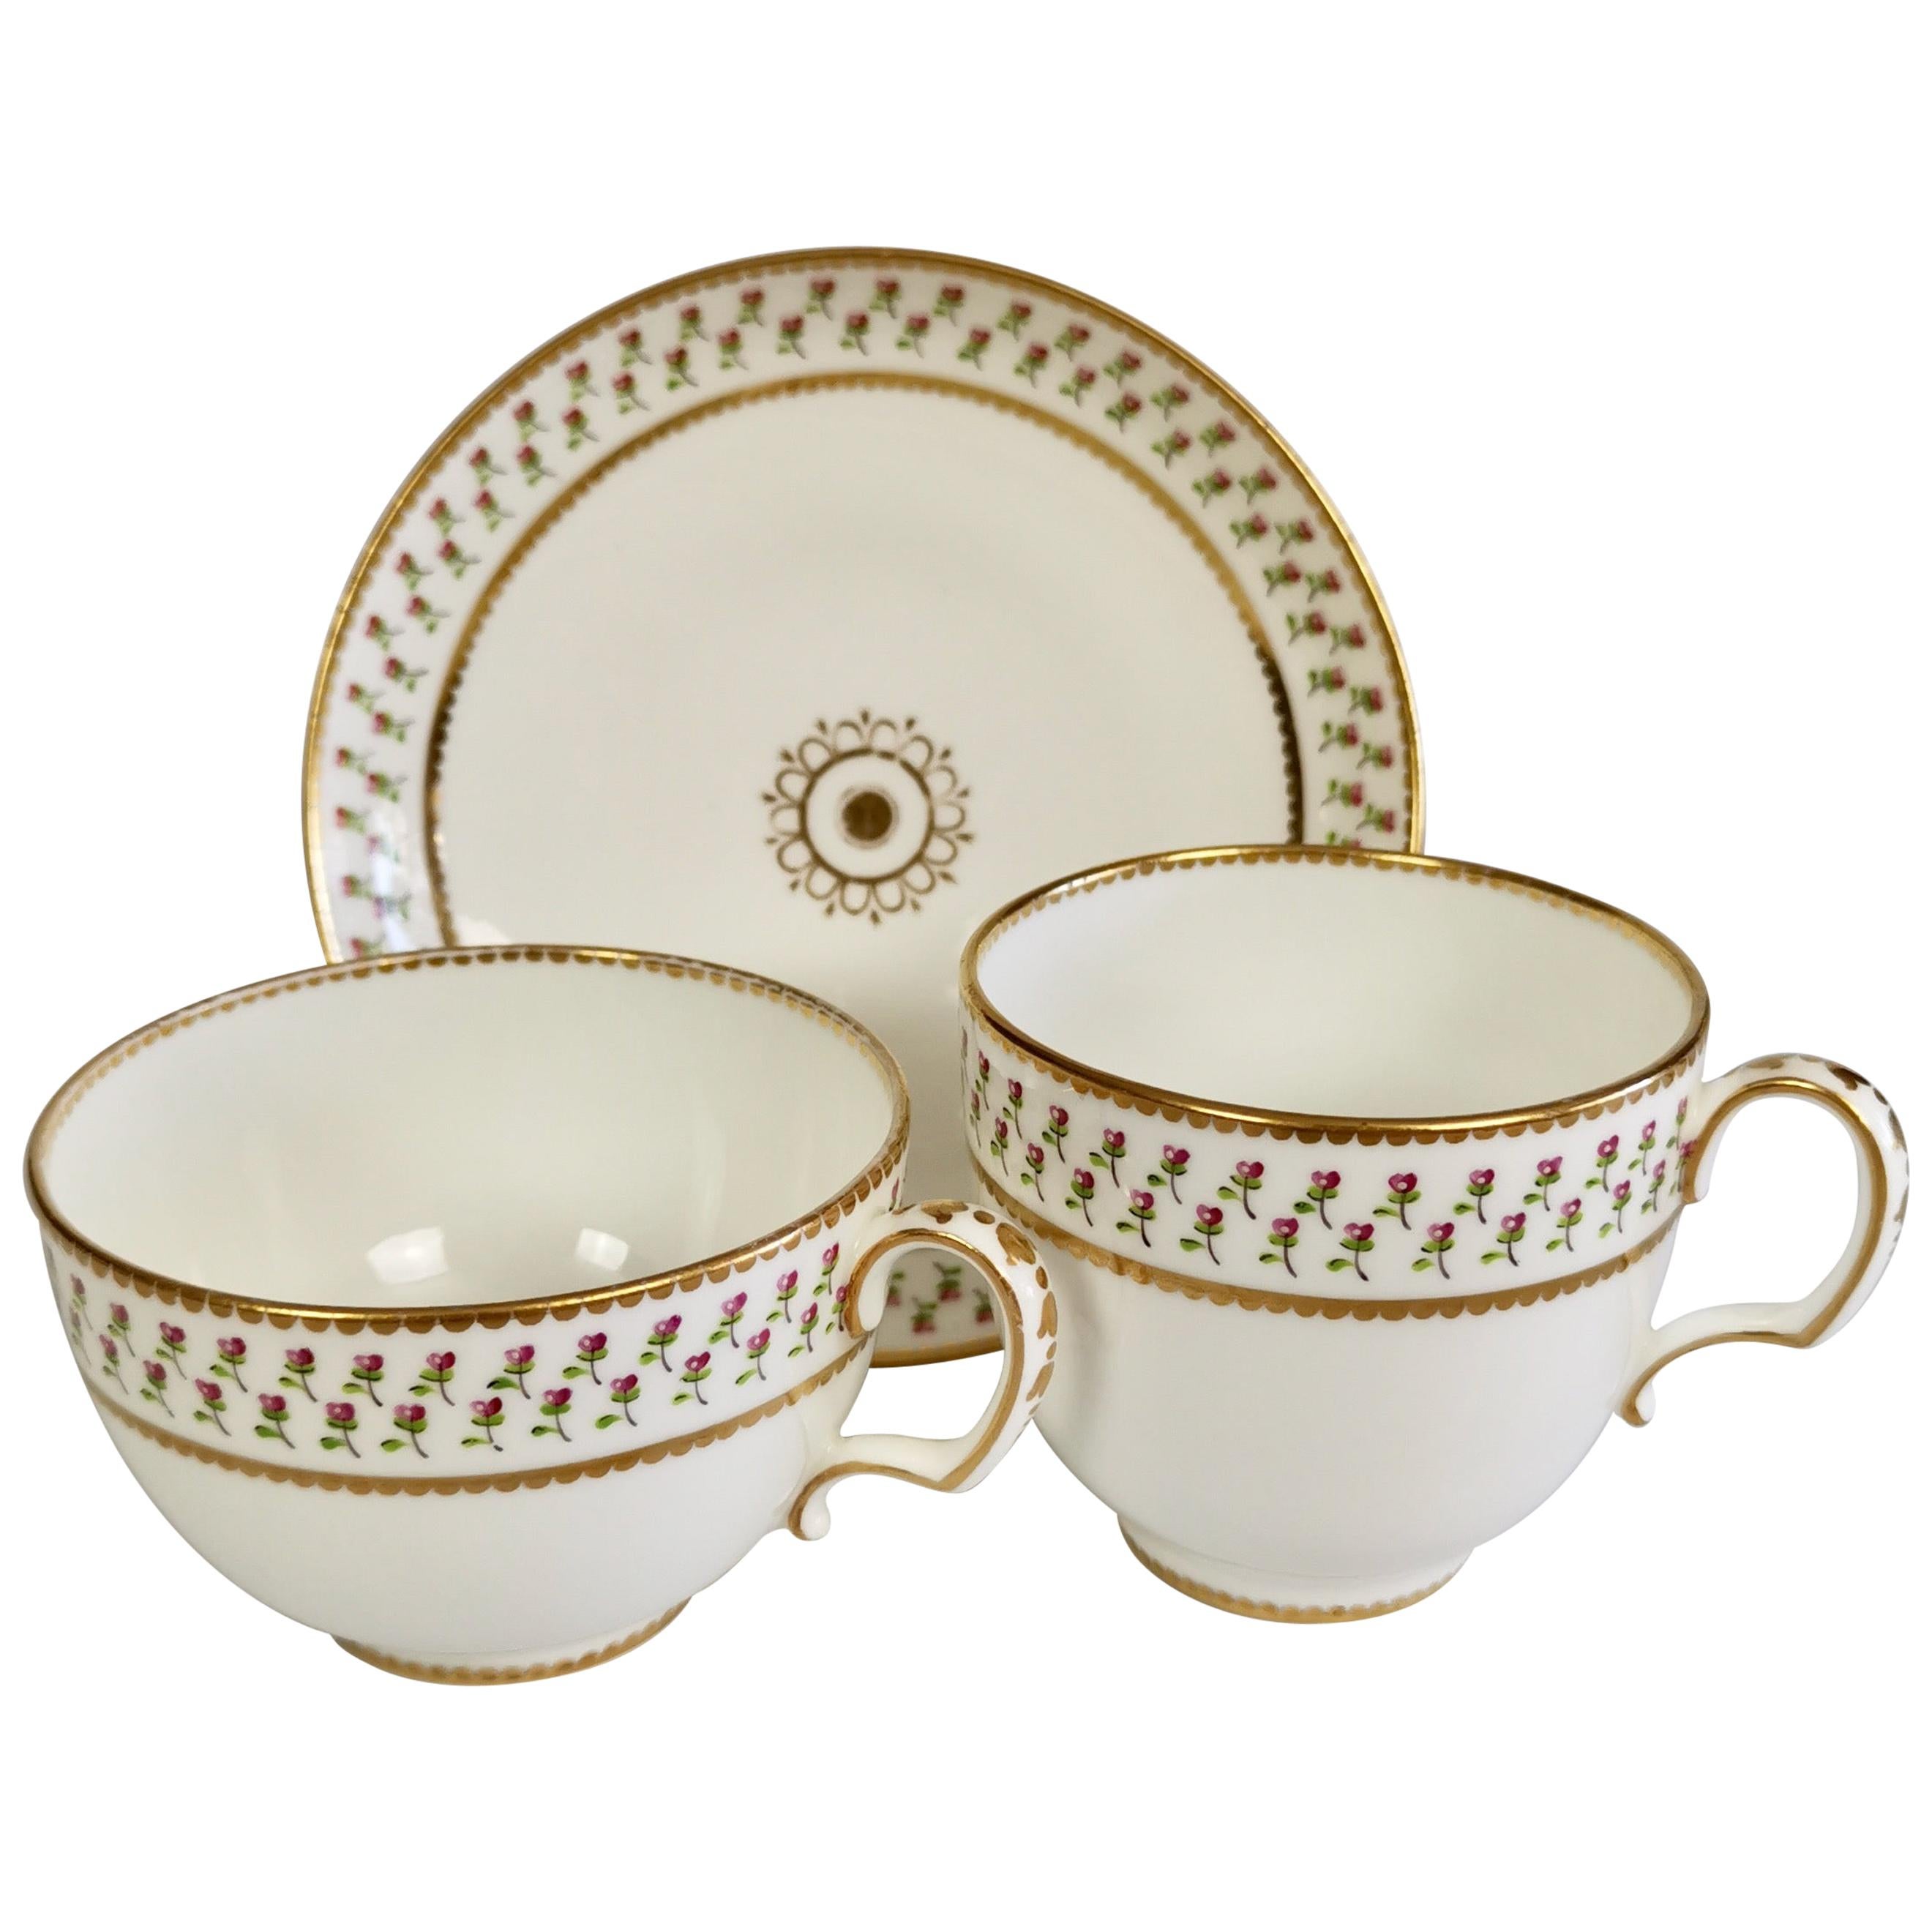 Derby King Street Porcelain Teacup Trio, White with Tiny Roses, 1848-1862